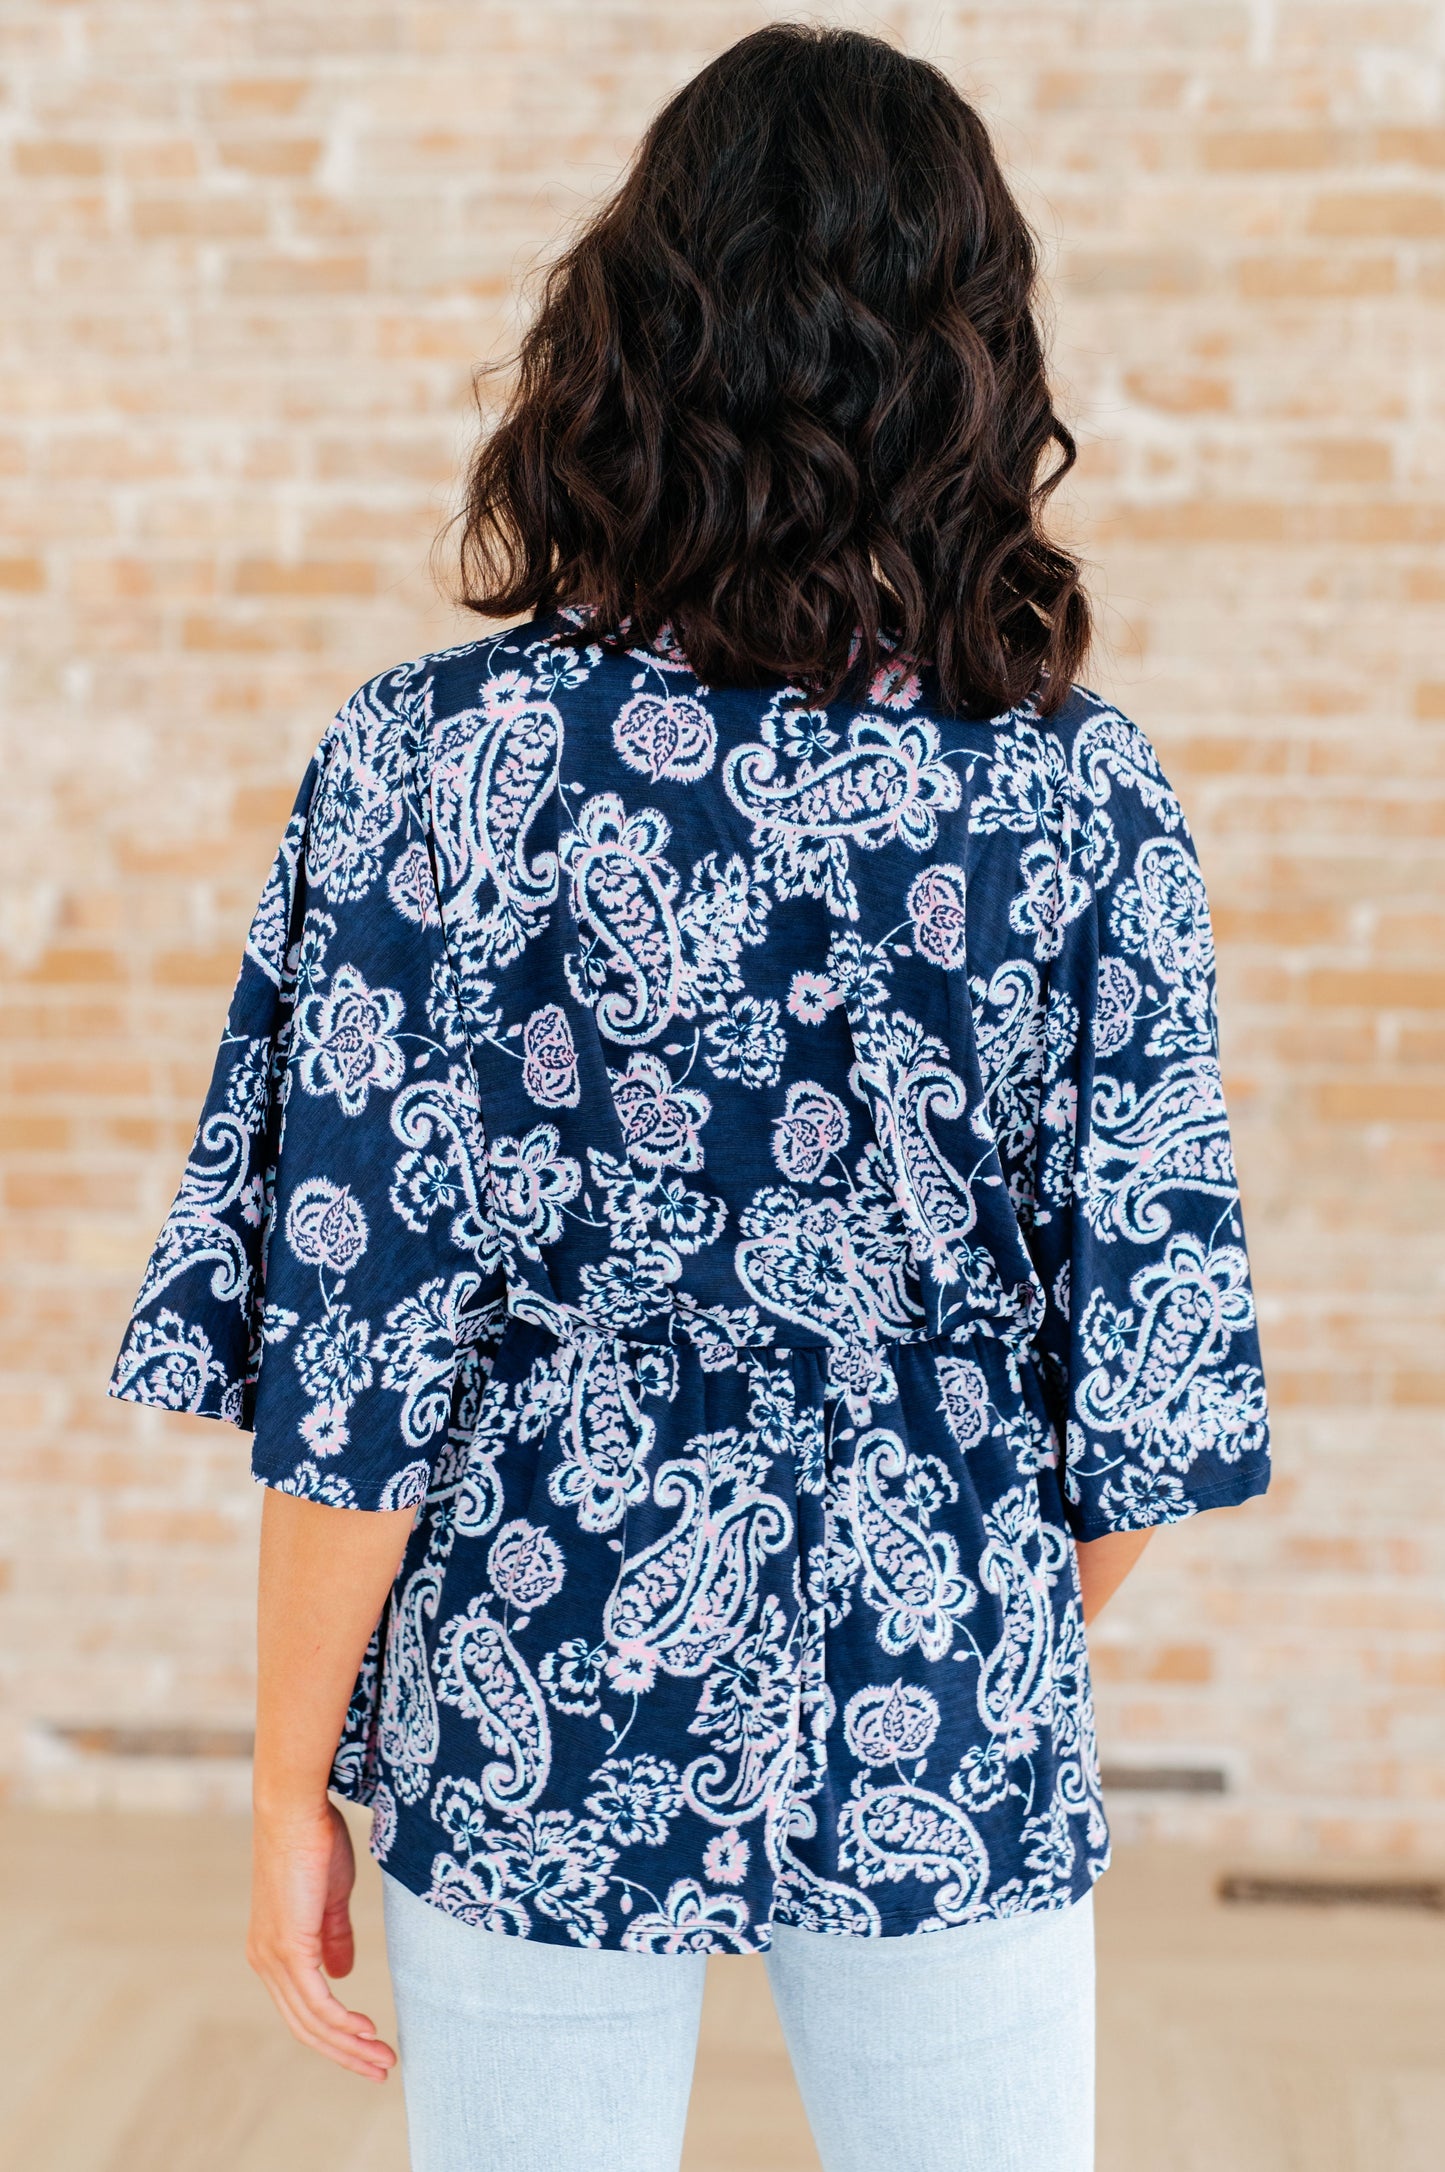 Peplum Top in Navy and Pink Paisley